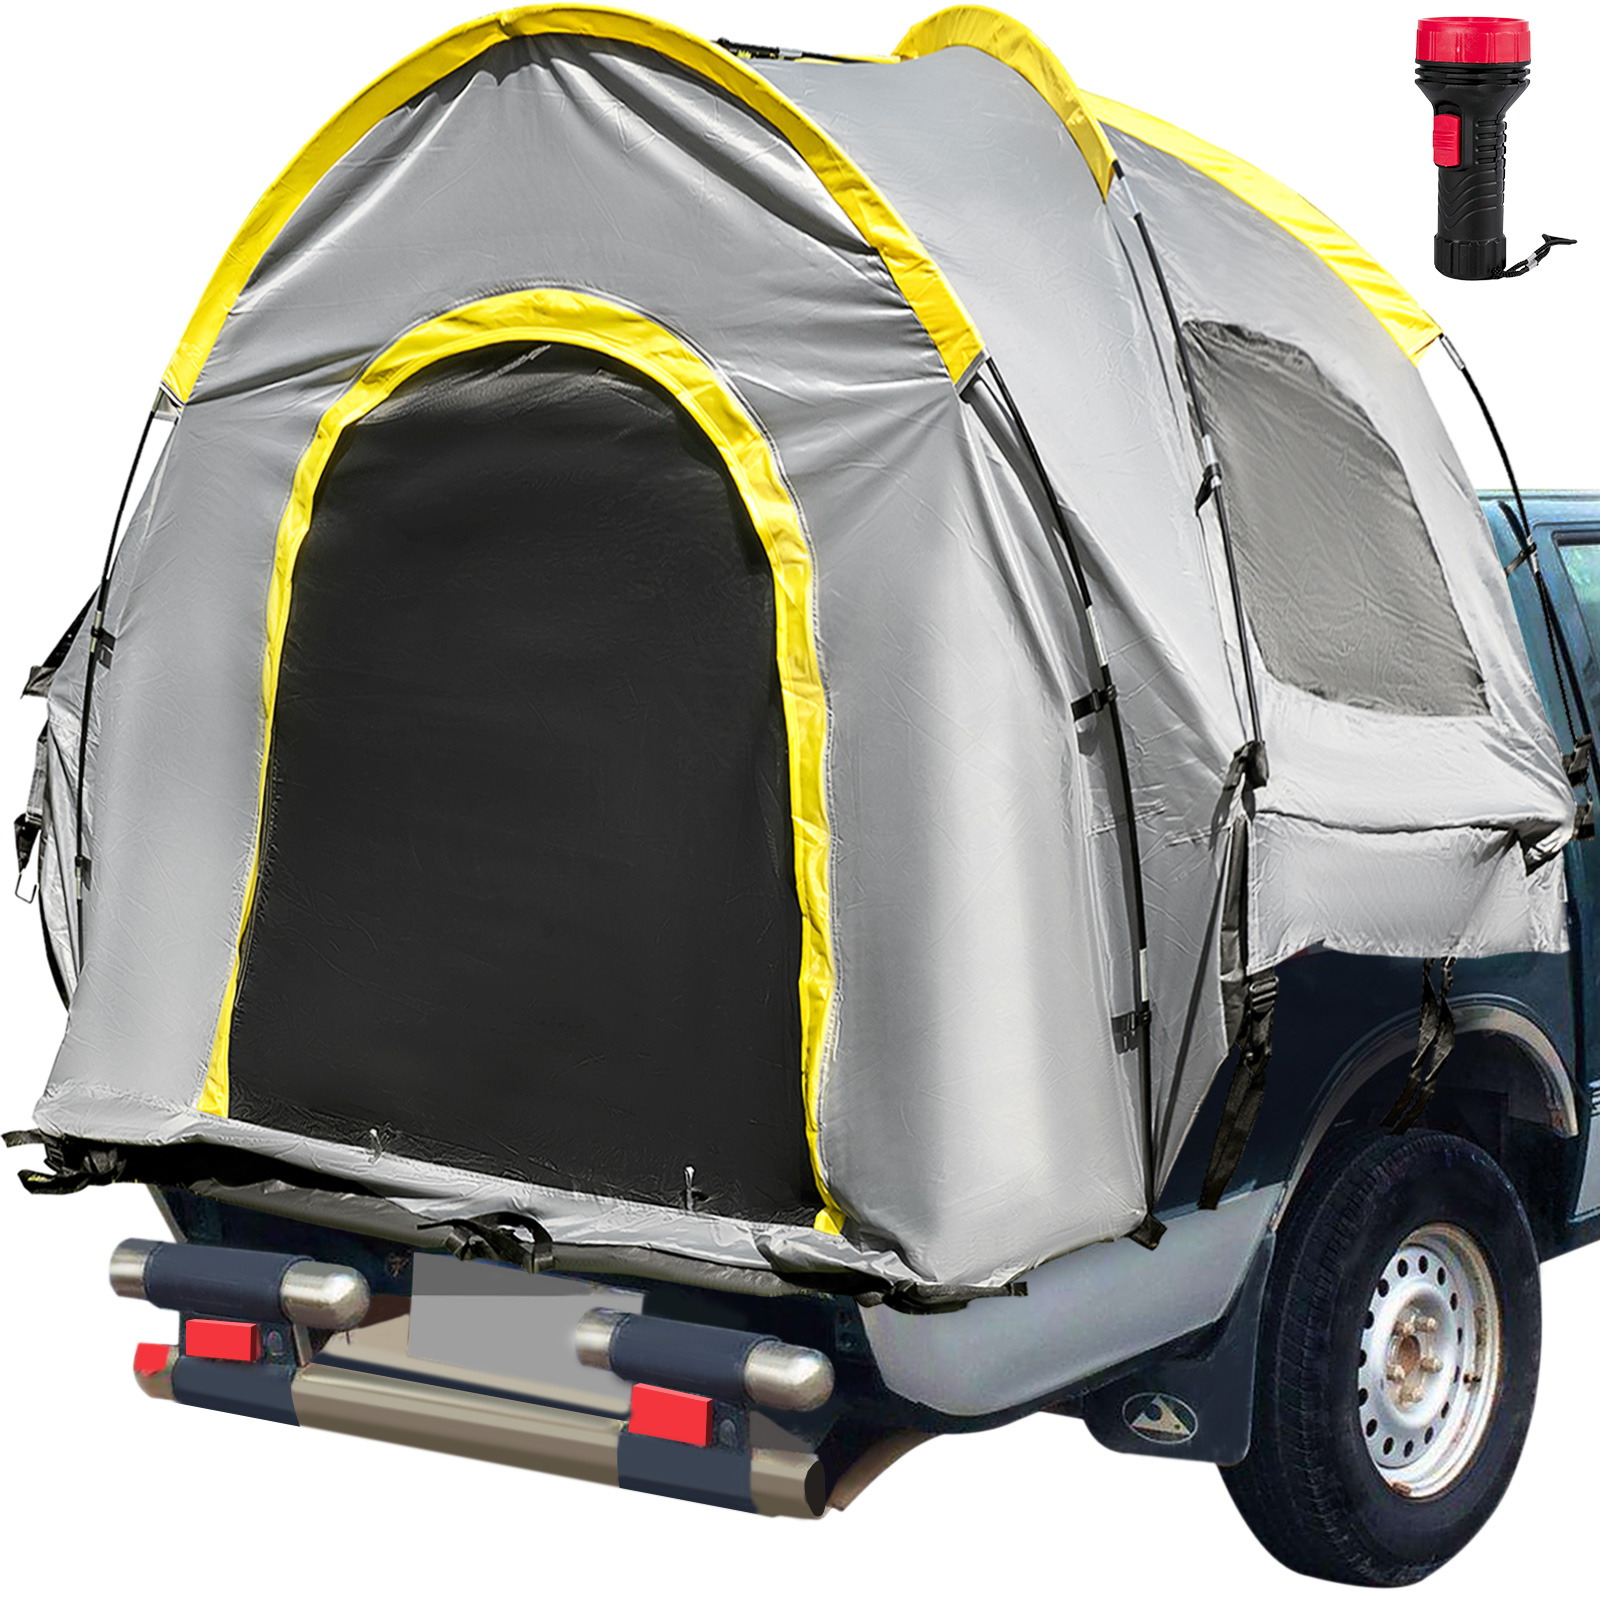 VEVOR Truck Tent 6.5鈥? Truck Bed Tent, Pickup Tent for Full Size Truck,  Waterproof Truck Camper, 2-Person Sleeping Capacity, Mesh Windows, Easy  To Setup Truck Tents For Camping, Hiking, Fishing